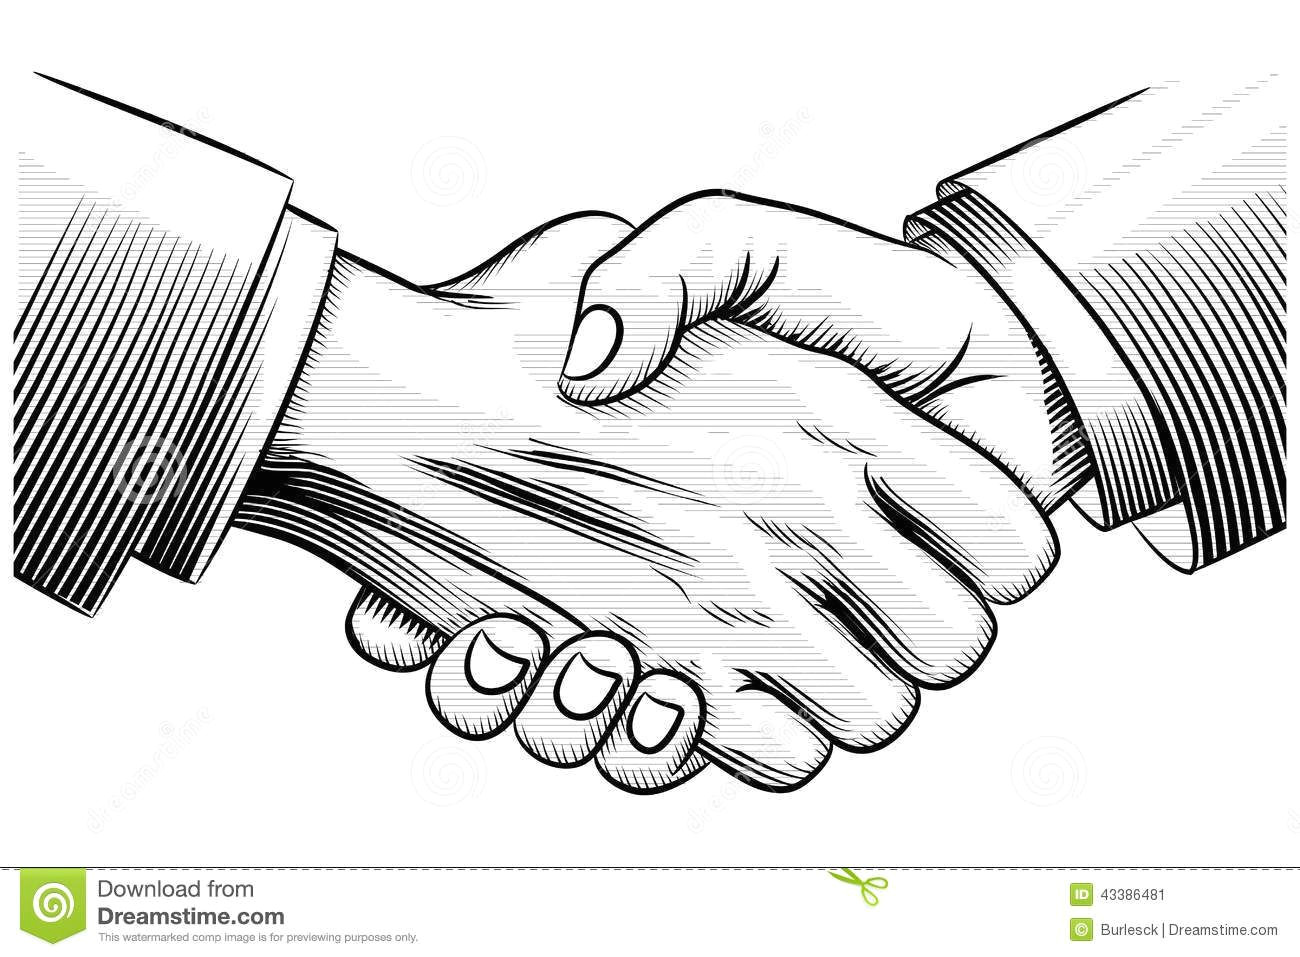 Drawings Of Monster Hands Sketch Handshake Download From Over 35 Million High Quality Stock